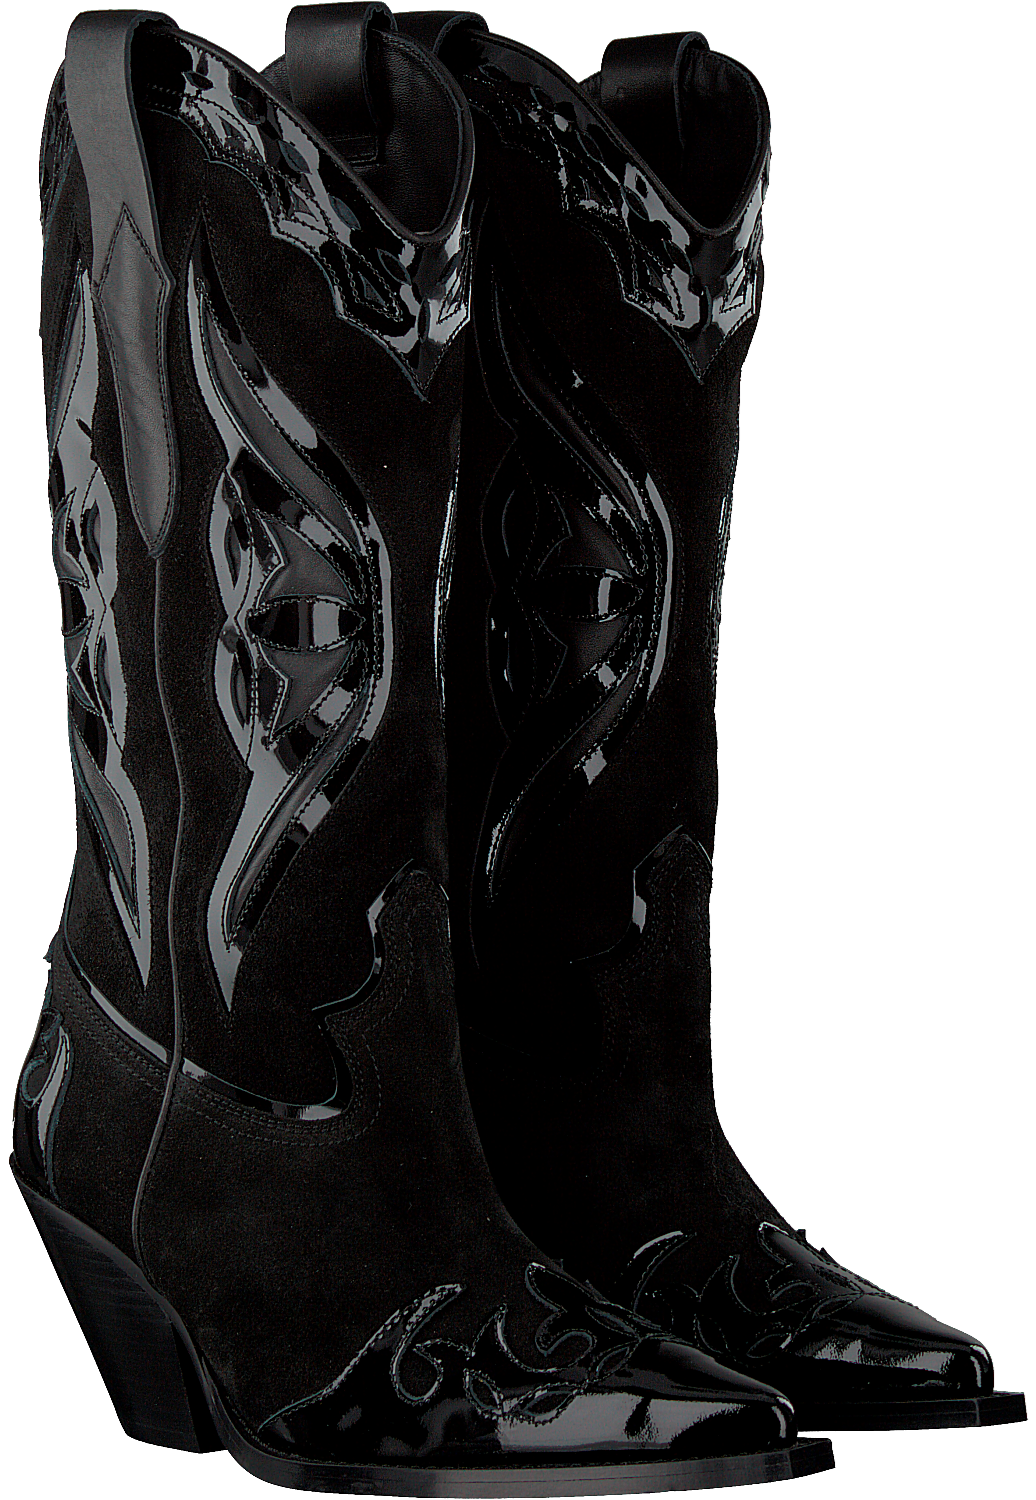 Pair Of Cowboy Boots PNG Images HD